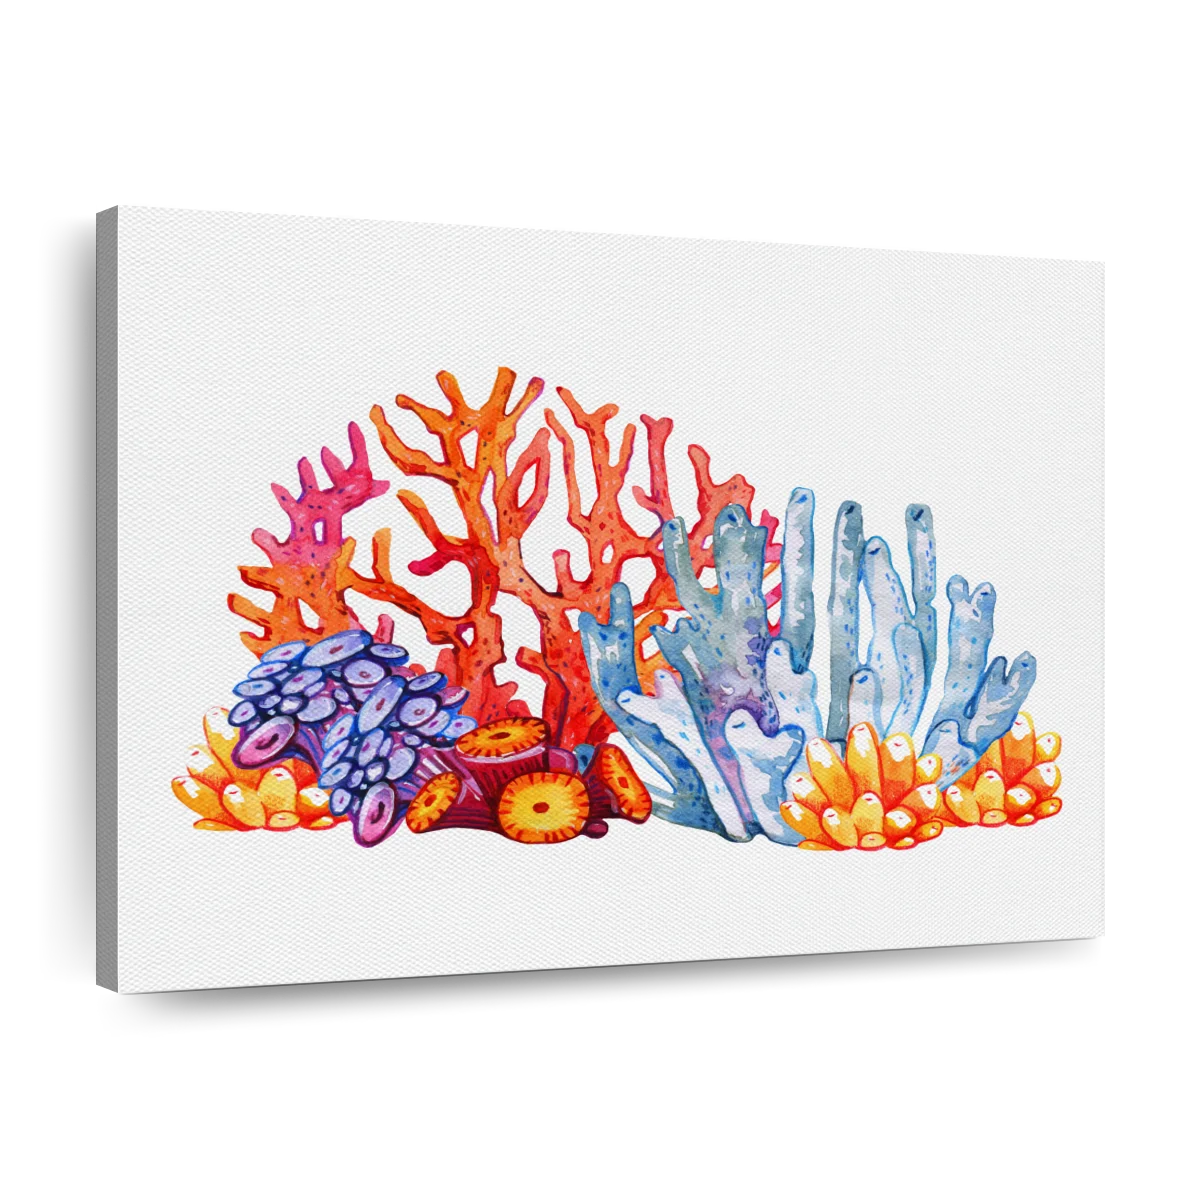 16x24 3-Piece Coral Oil Painting Canvas Set - Bulk Reef Supply